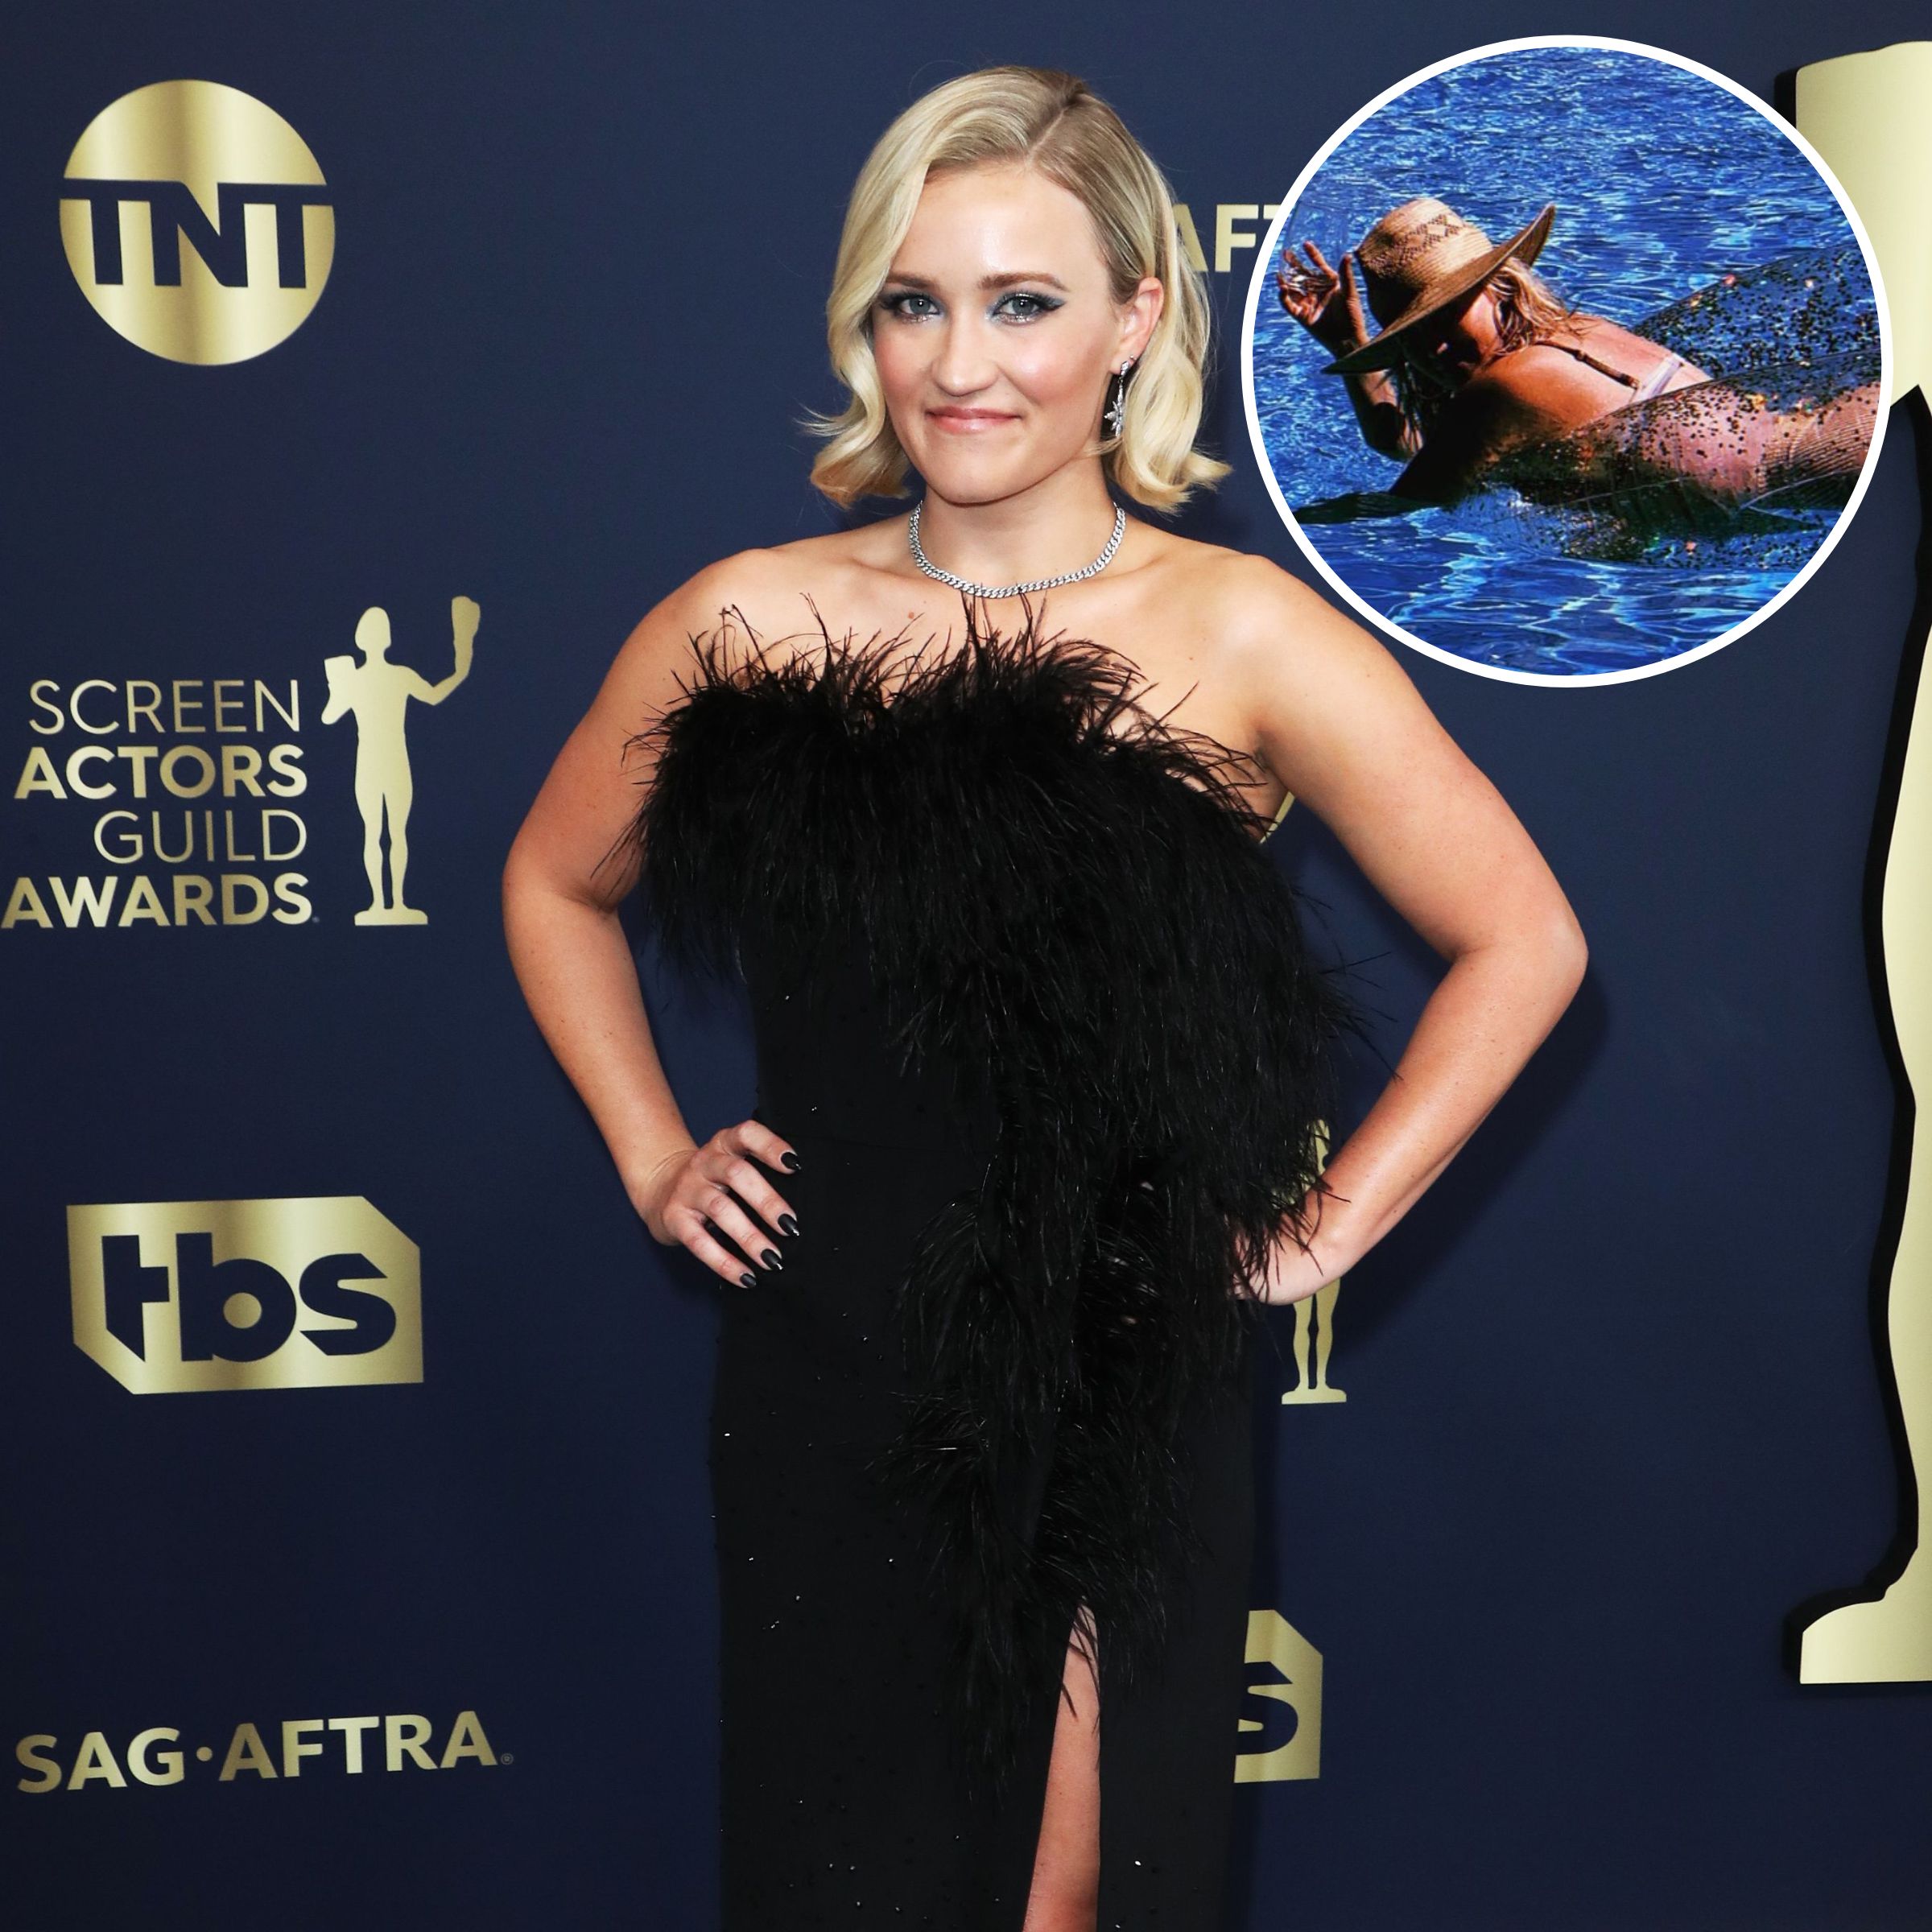 brandi mackey recommends Emily Osment Nude Pics